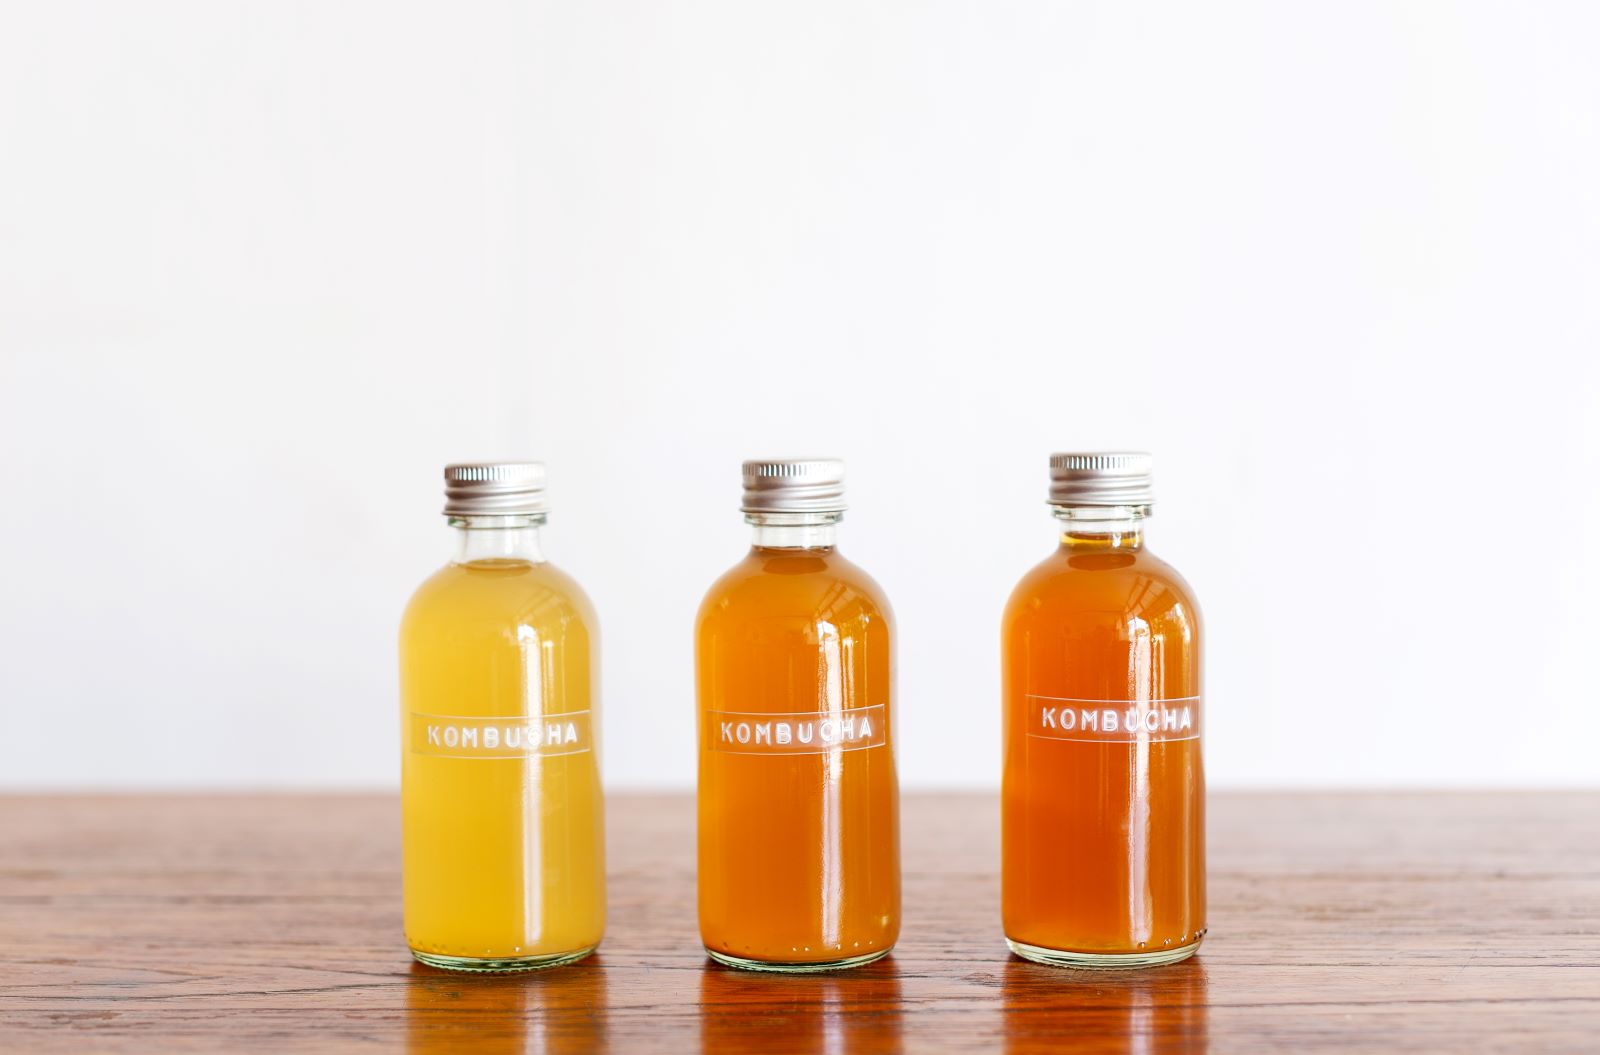 Does Kombucha Actually Help With Digestion?